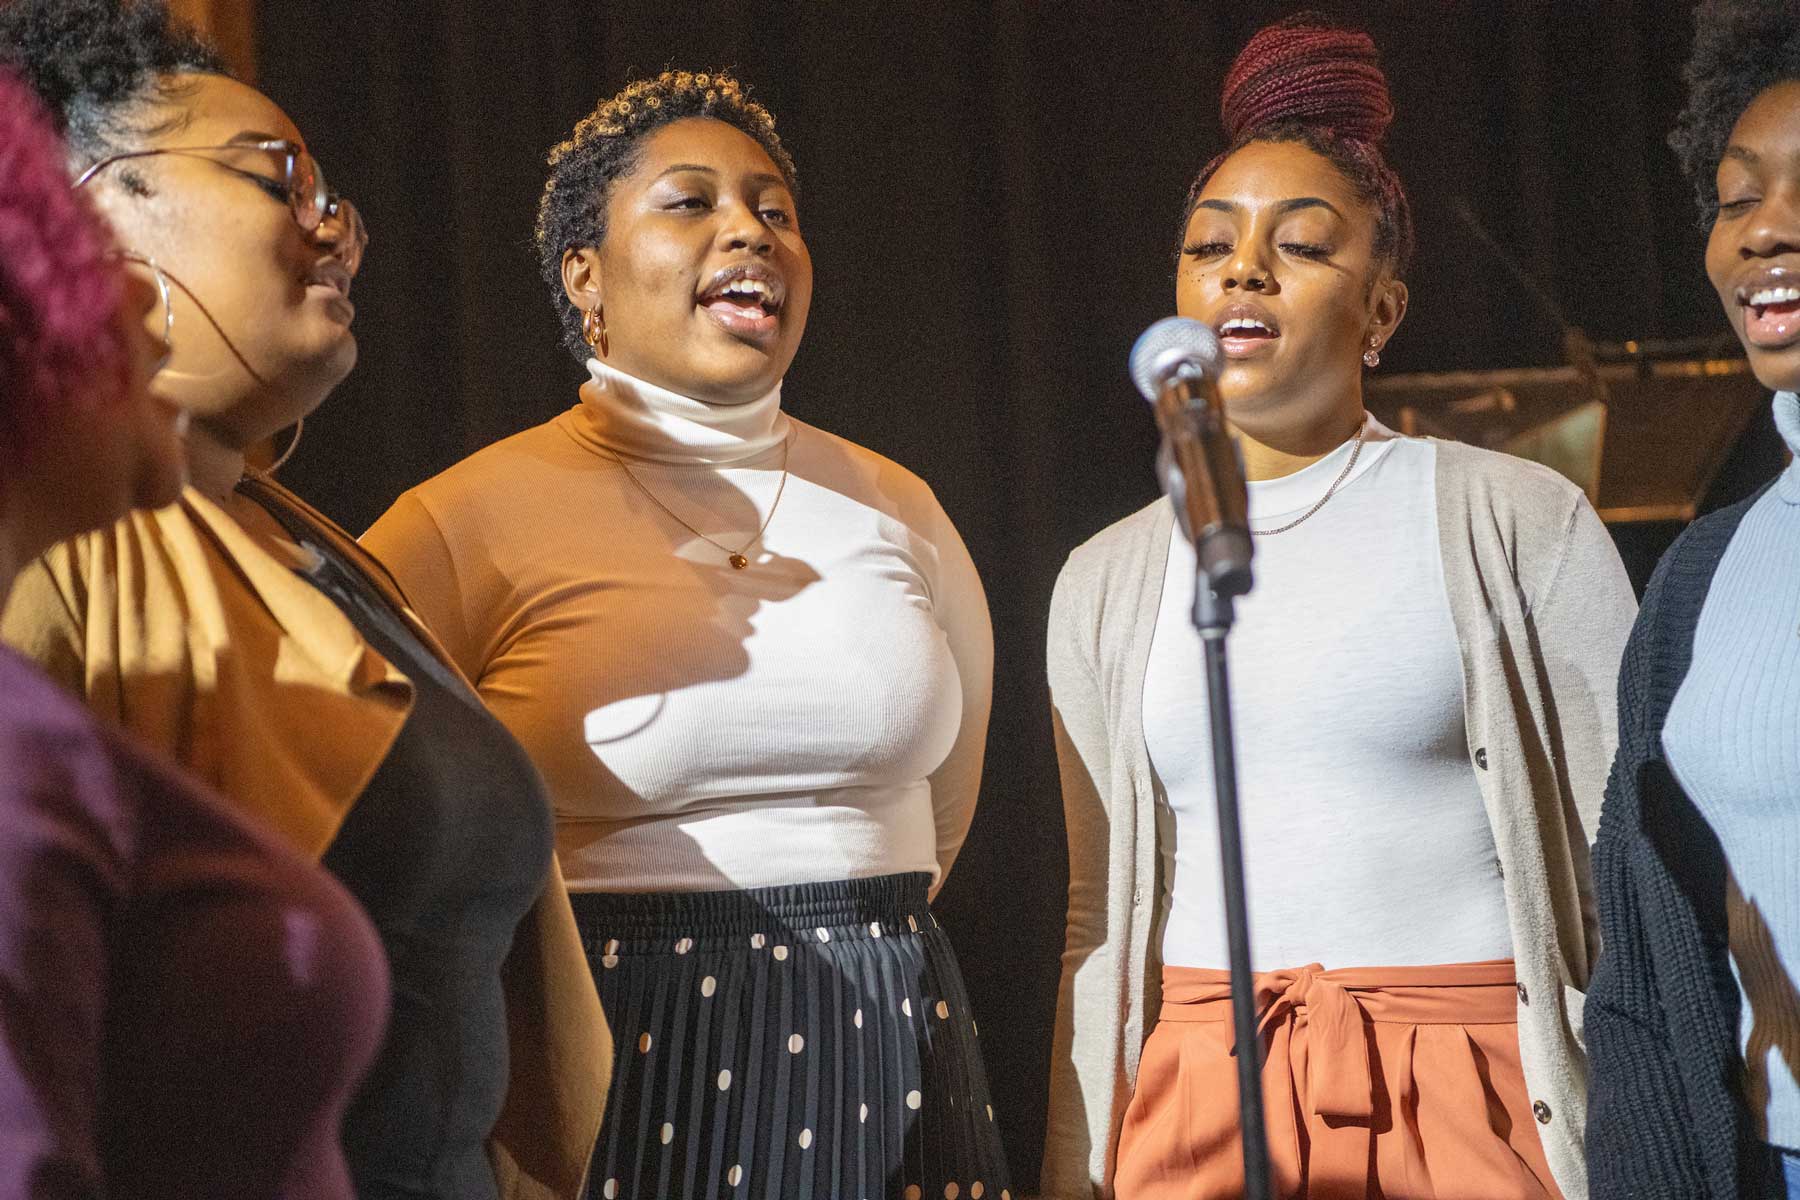 Photo of The Anointed Praise gospel choir performing in front of a microphone.